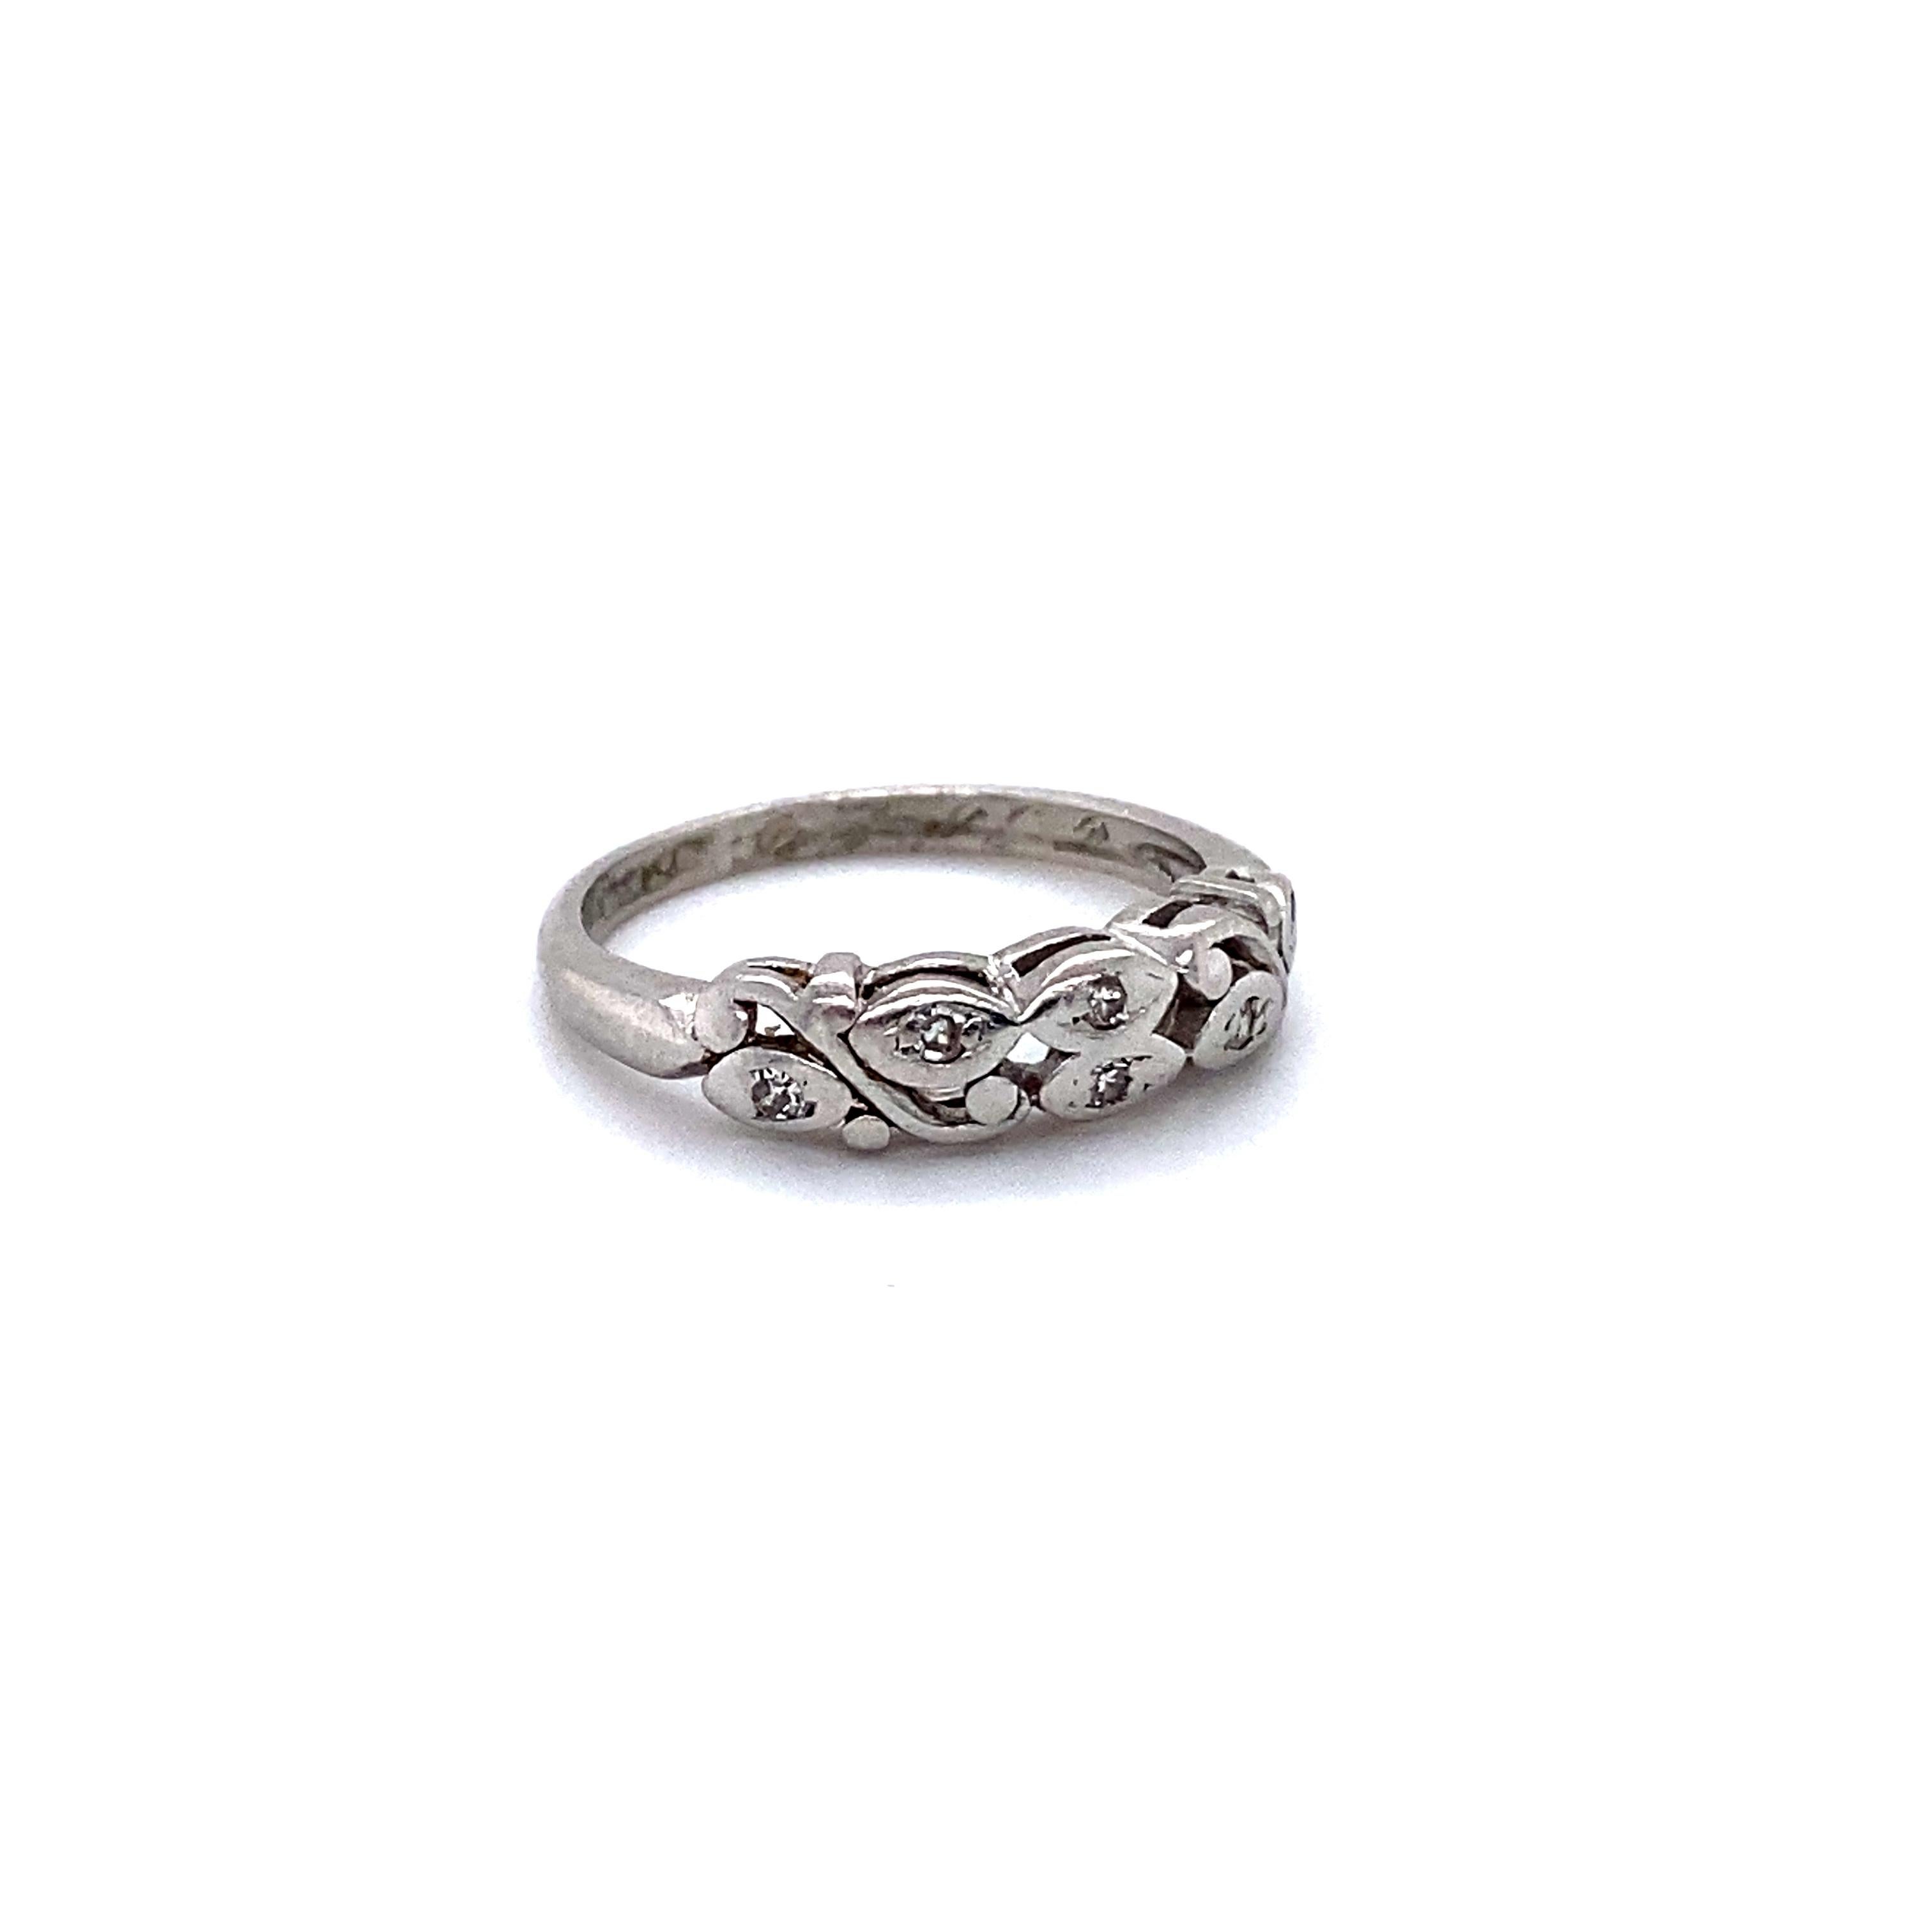 This Gorgeous Floral Vintage Wedding Band would be a fantastic compliment to any engagement ring - or be a great stand alone or stackable! Crafted in Platinum, this band features Pave Set Diamonds, with lovely scrolling floral details. There are a